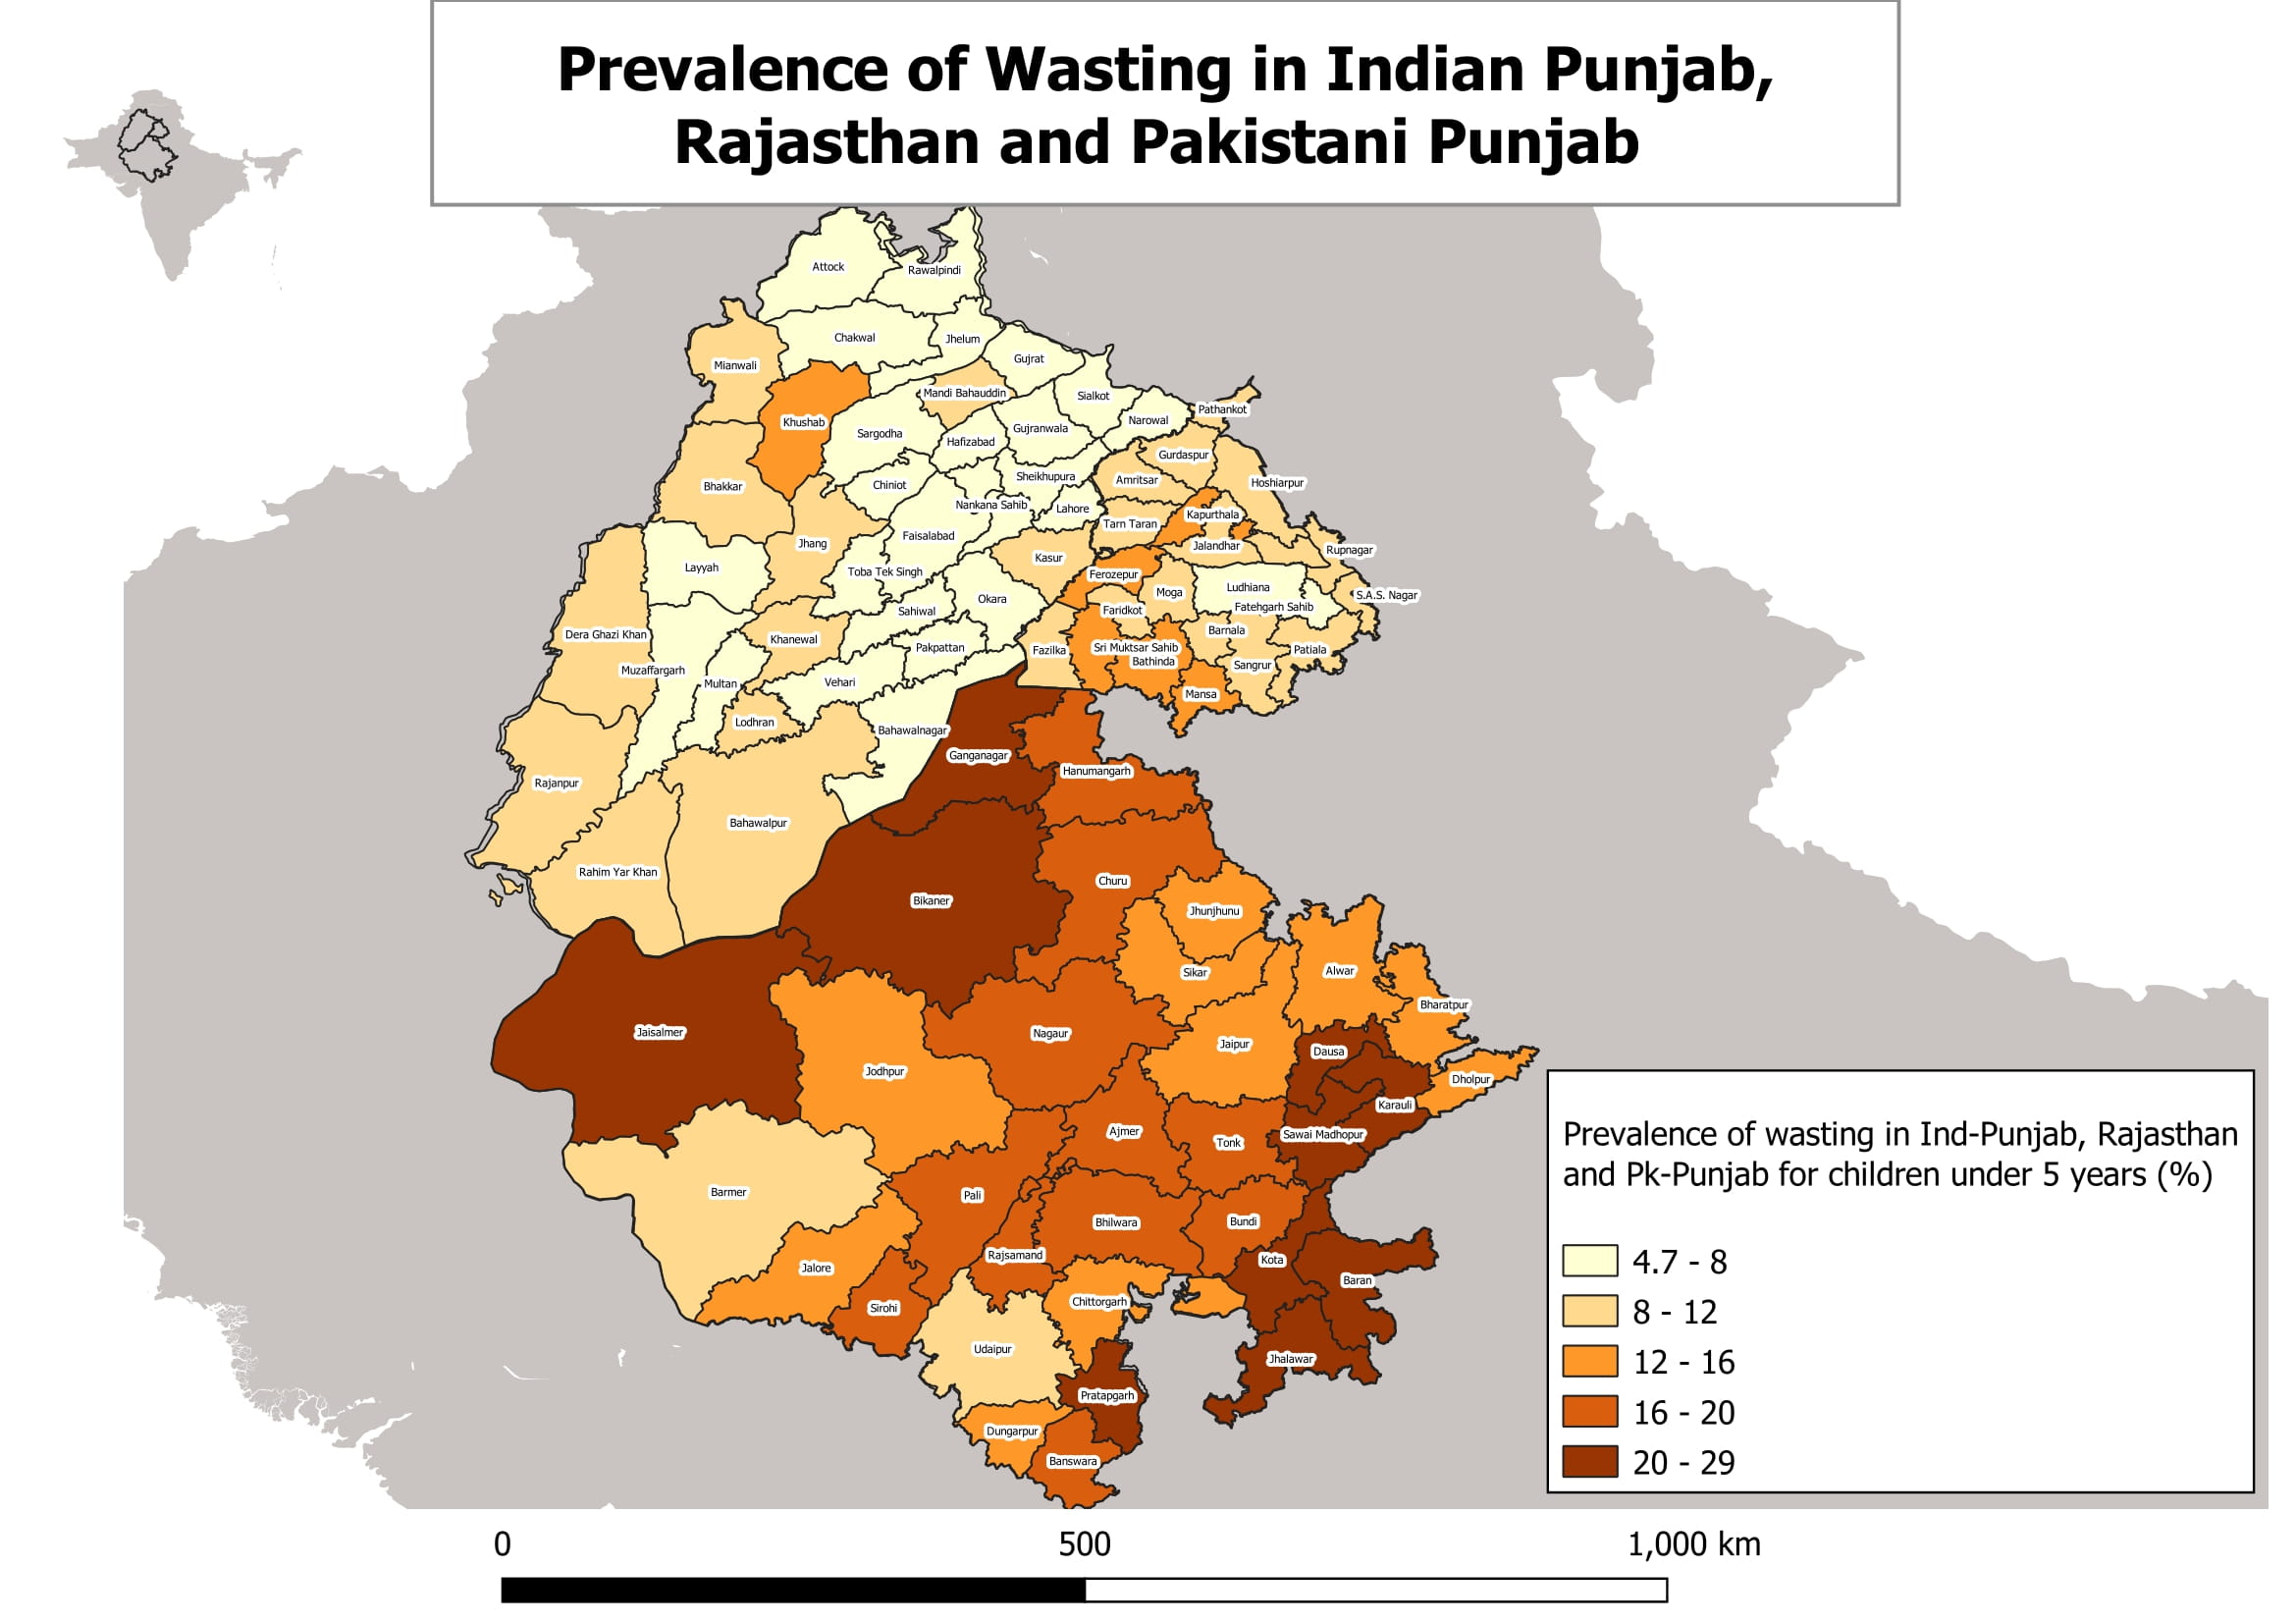 Map showing the prevalence of wasting in Indian Punjab, Rajasthan, and Pakistani Punjab